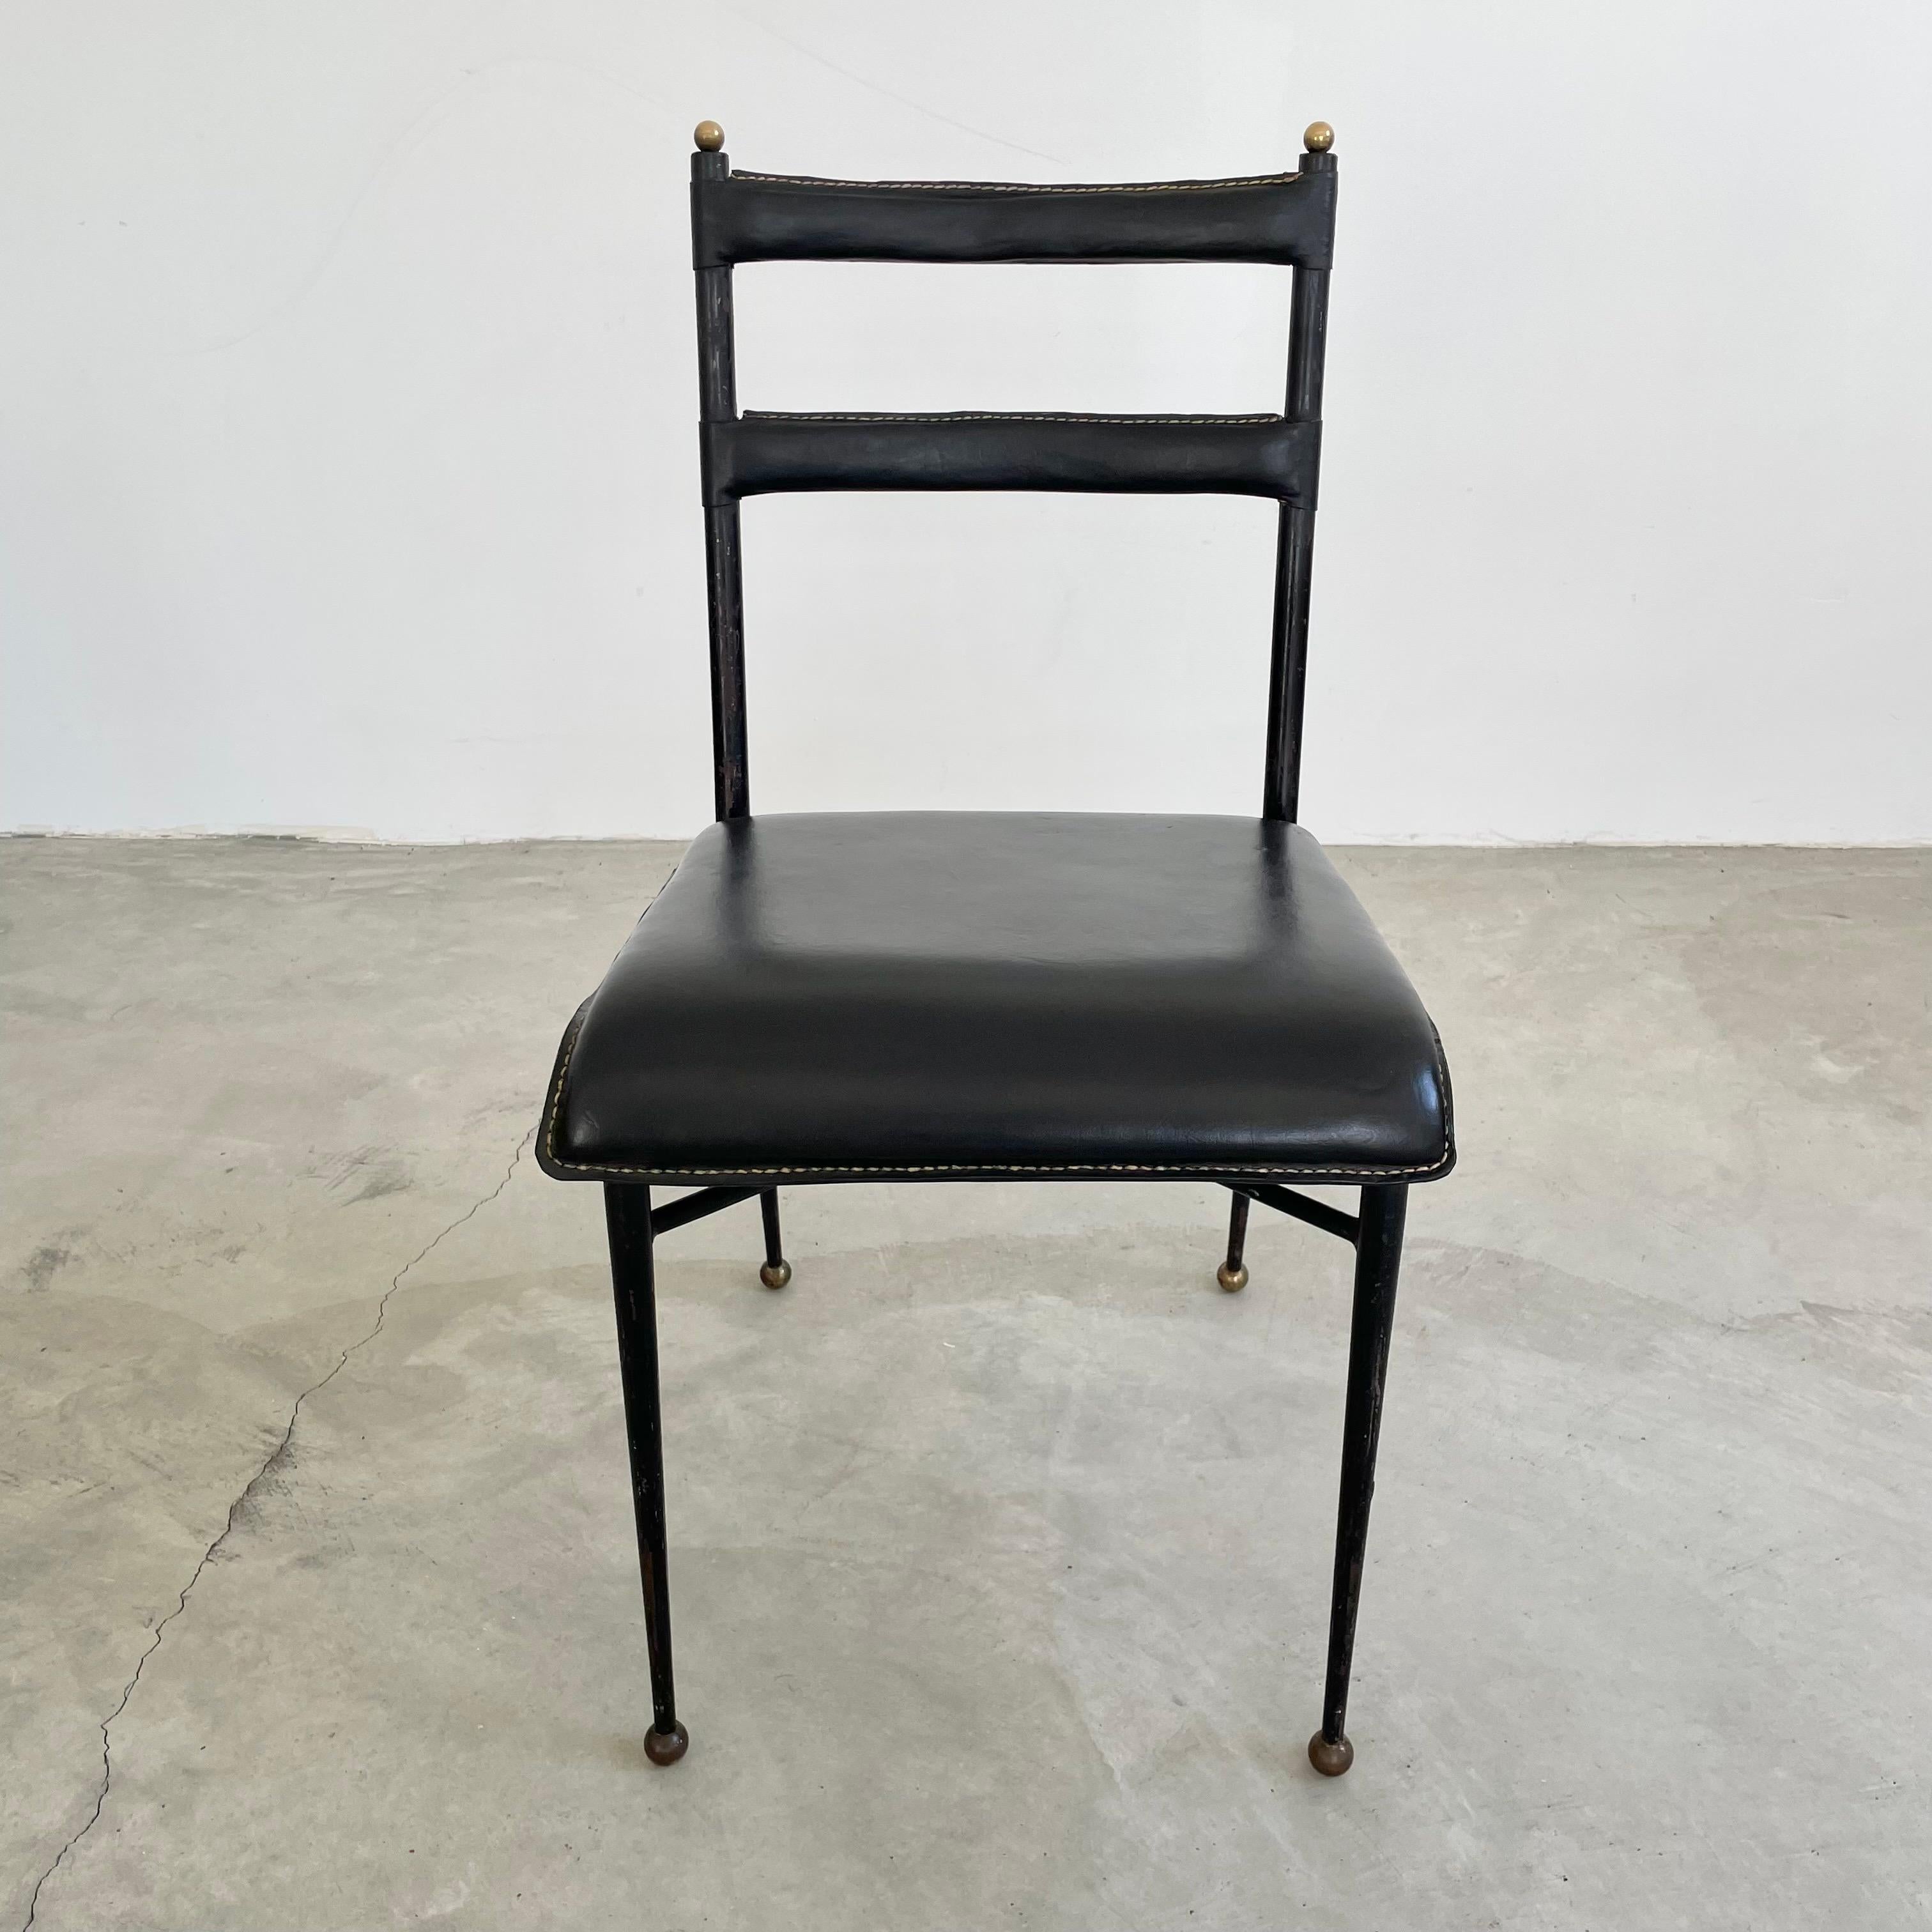 Stunning black leather armchair by French designer Jacques Adnet. Black metal frame with tapered legs, ending in brass ball feet. Brass balls adorn the top of the frame as well. Thick leather seat and backrests hand-stitched in the characteristic